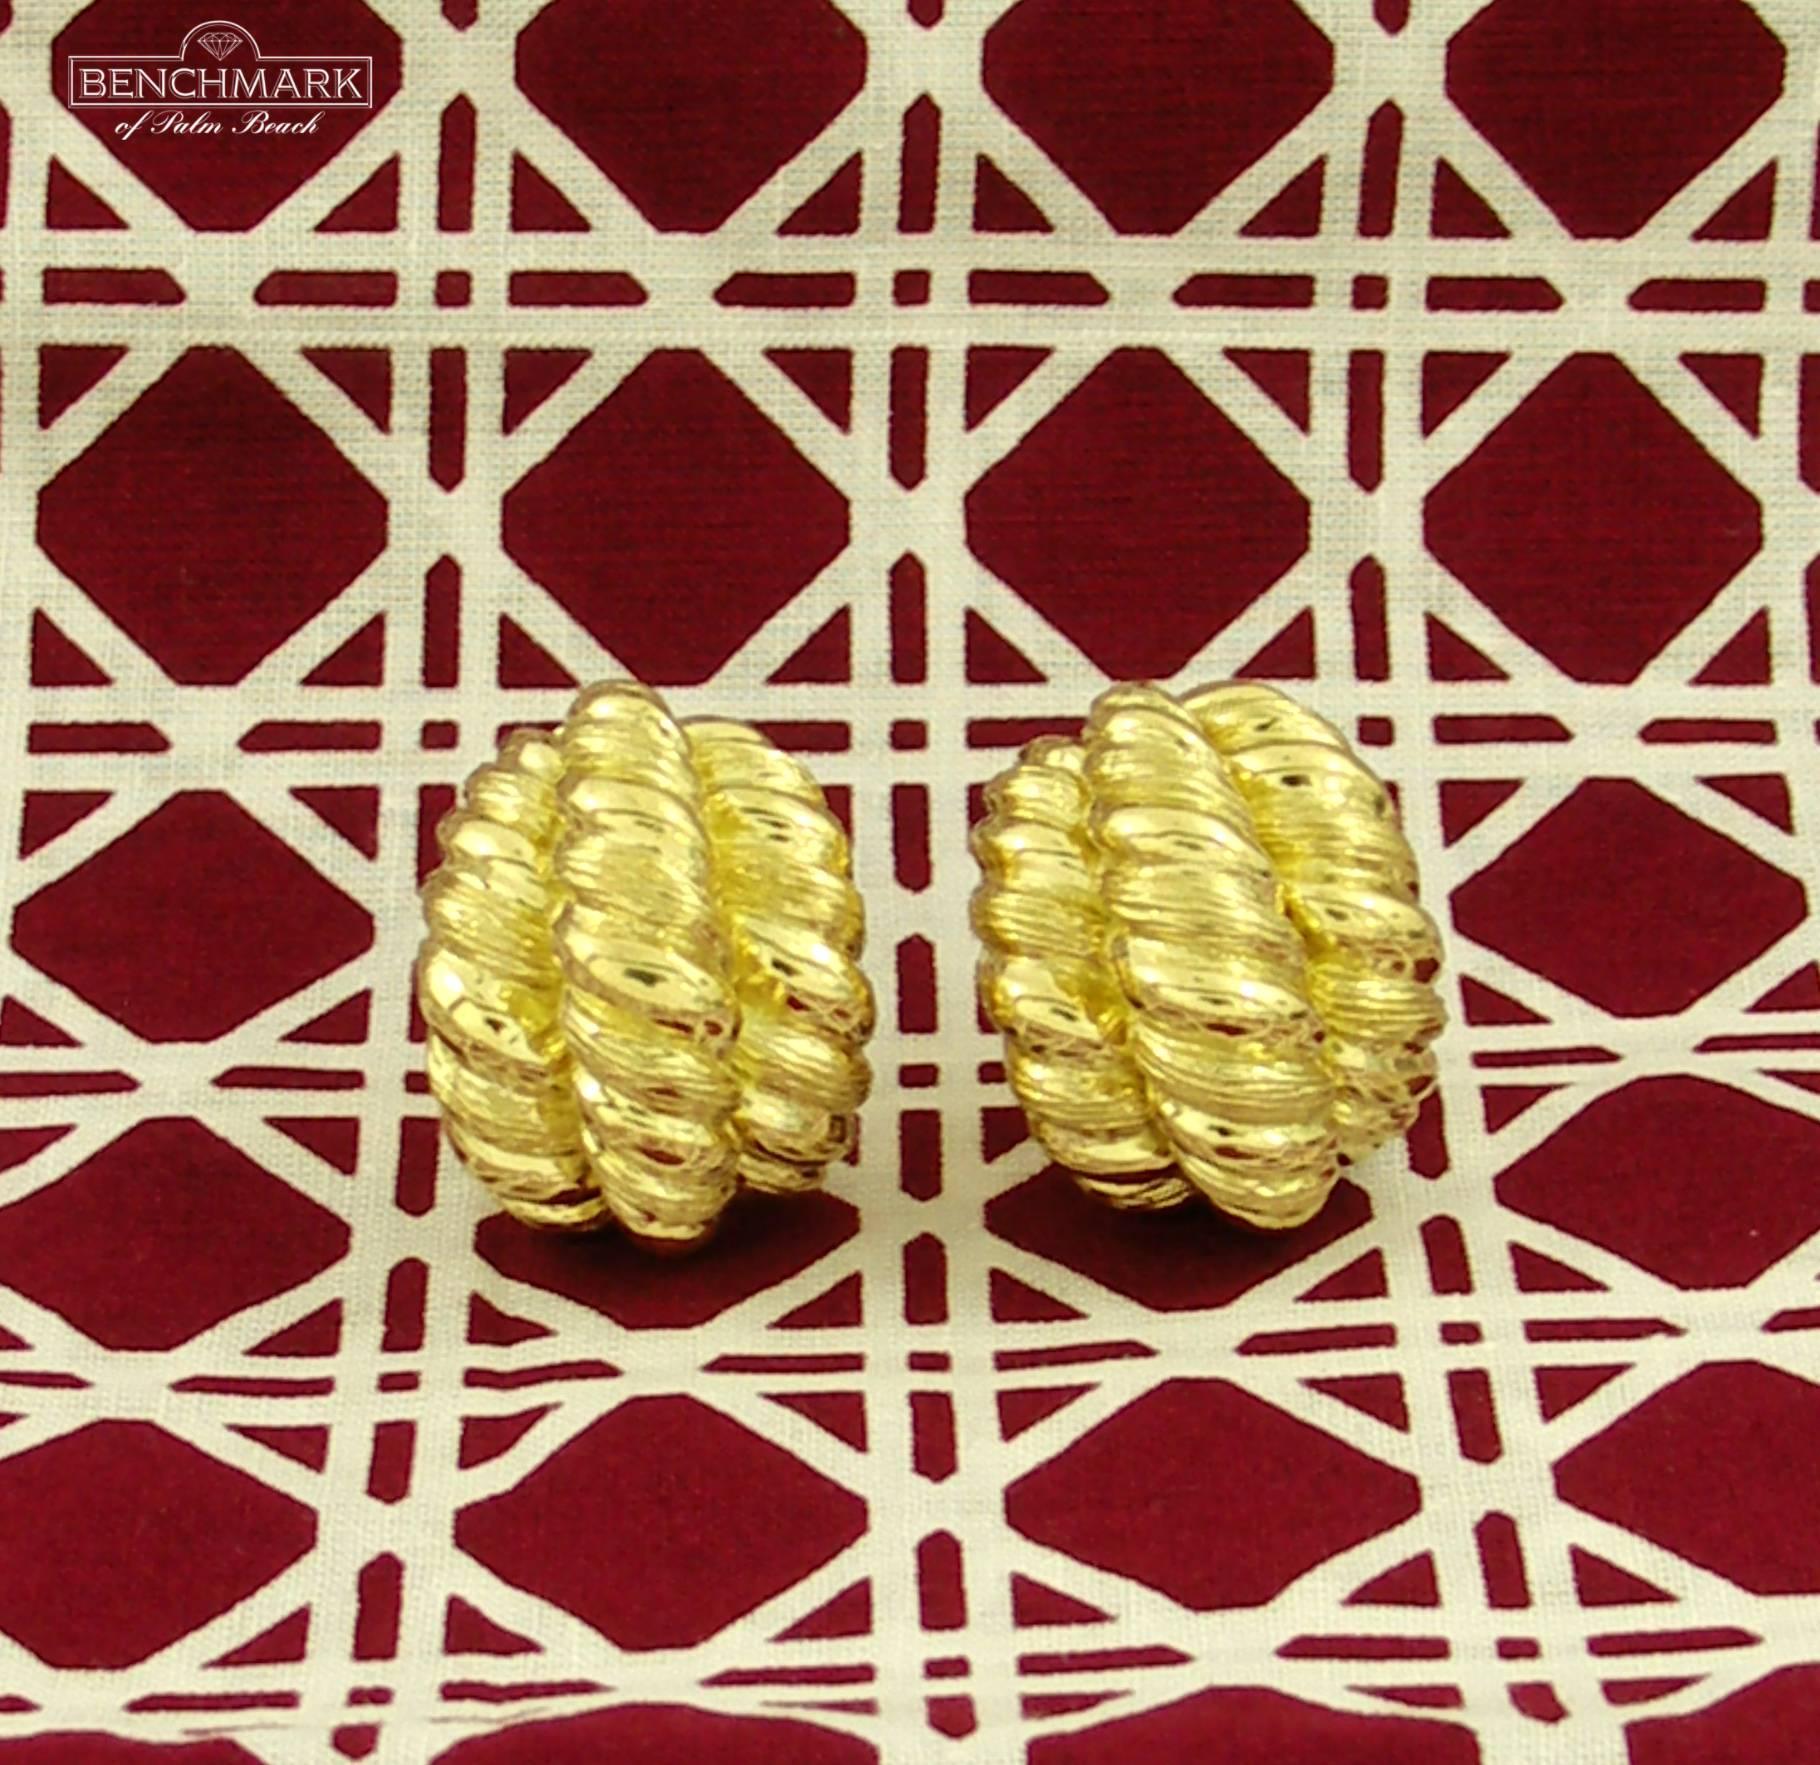 A pair of ladies, 18 karat yellow gold earrings measuring 7/8 of an inch wide, and 1 1/8 inch long, comprised of 3 rows of twisted rope design. With a bombe' front, they have an excellent scale and dimension. These fashionable mid-century earrings